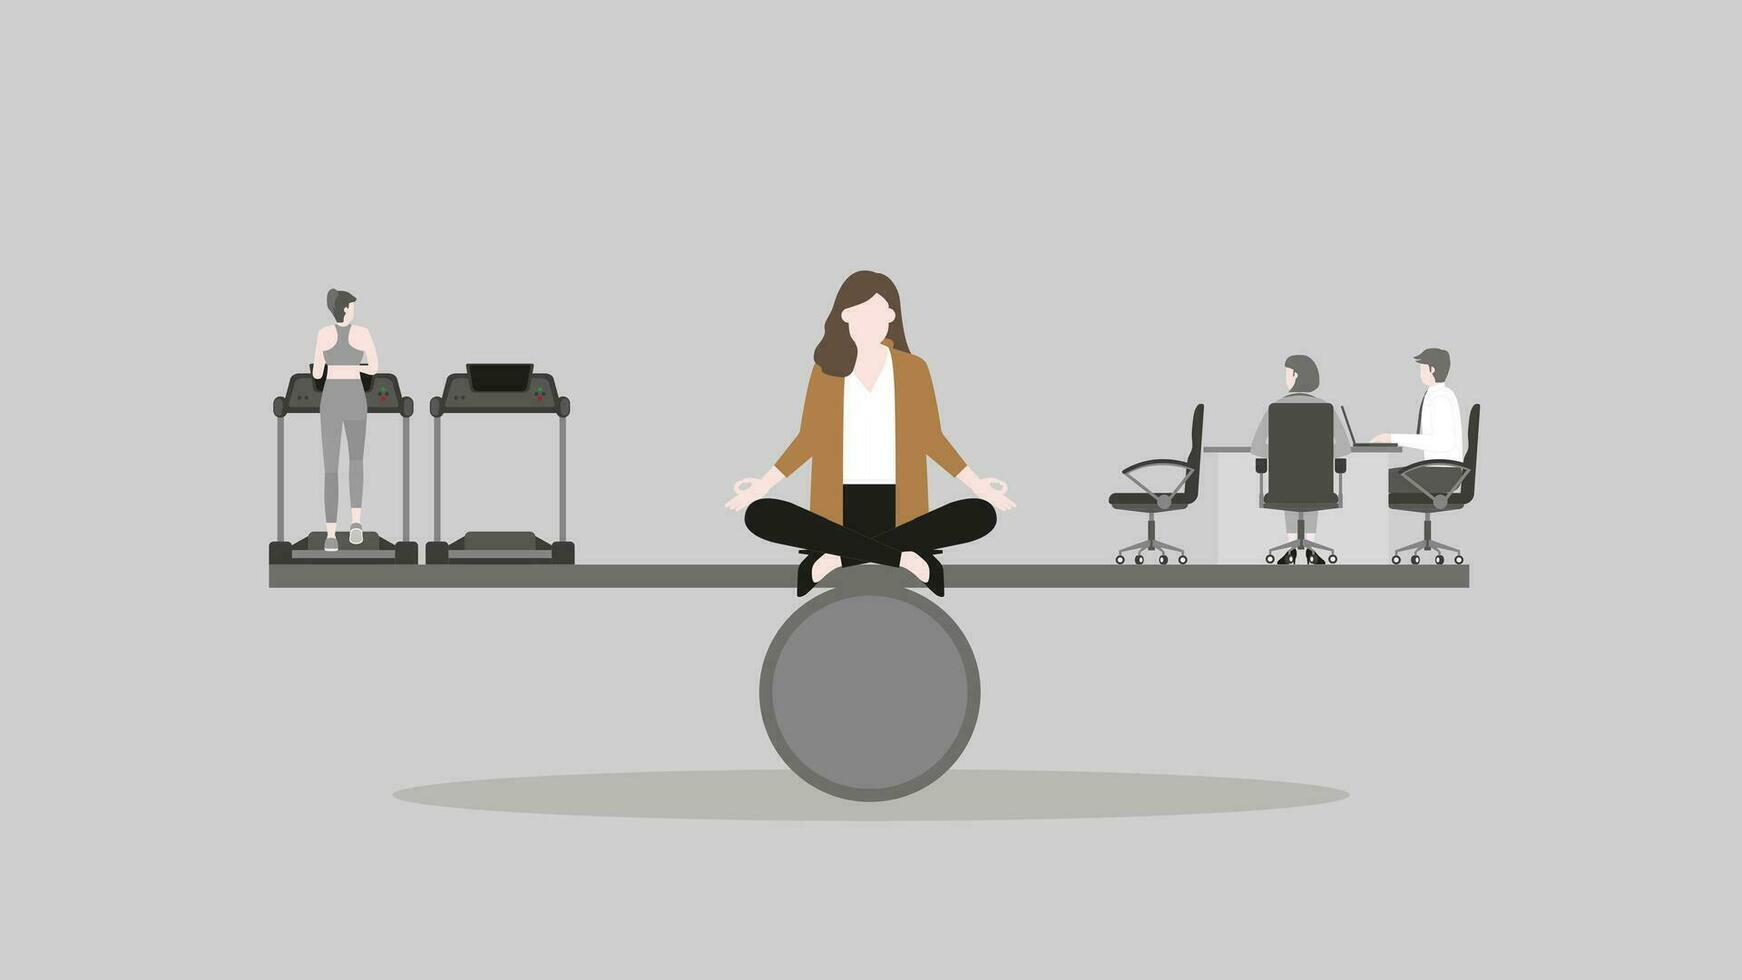 Work life balance concept. A meditation woman sits and thinks at the center of seesaw beam between exercise running on treadmill and office meeting vector